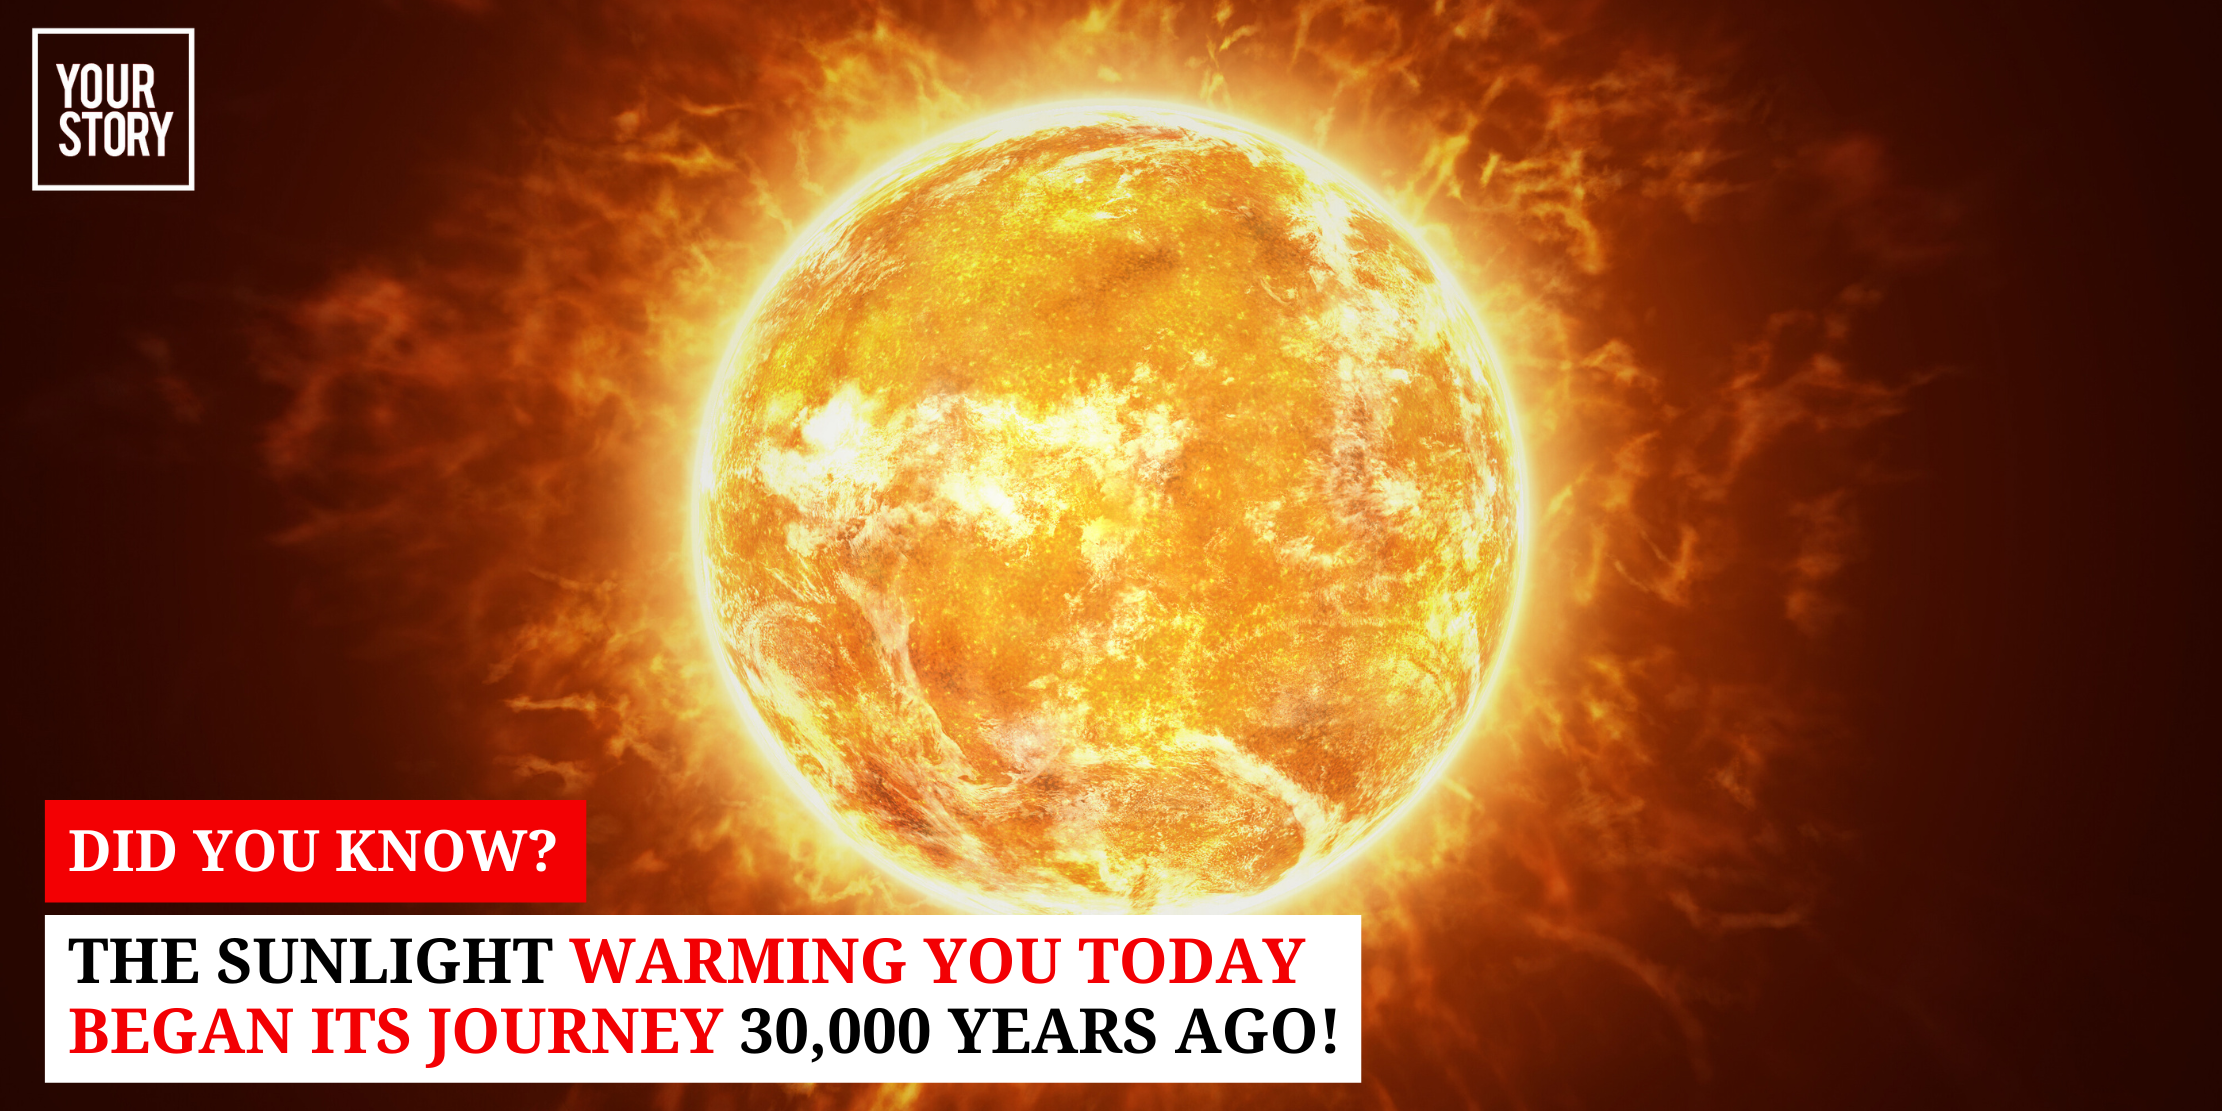 ⁠Did You Know? The Sunlight Warming You Today Began Its Journey 30,000 Years Ago!